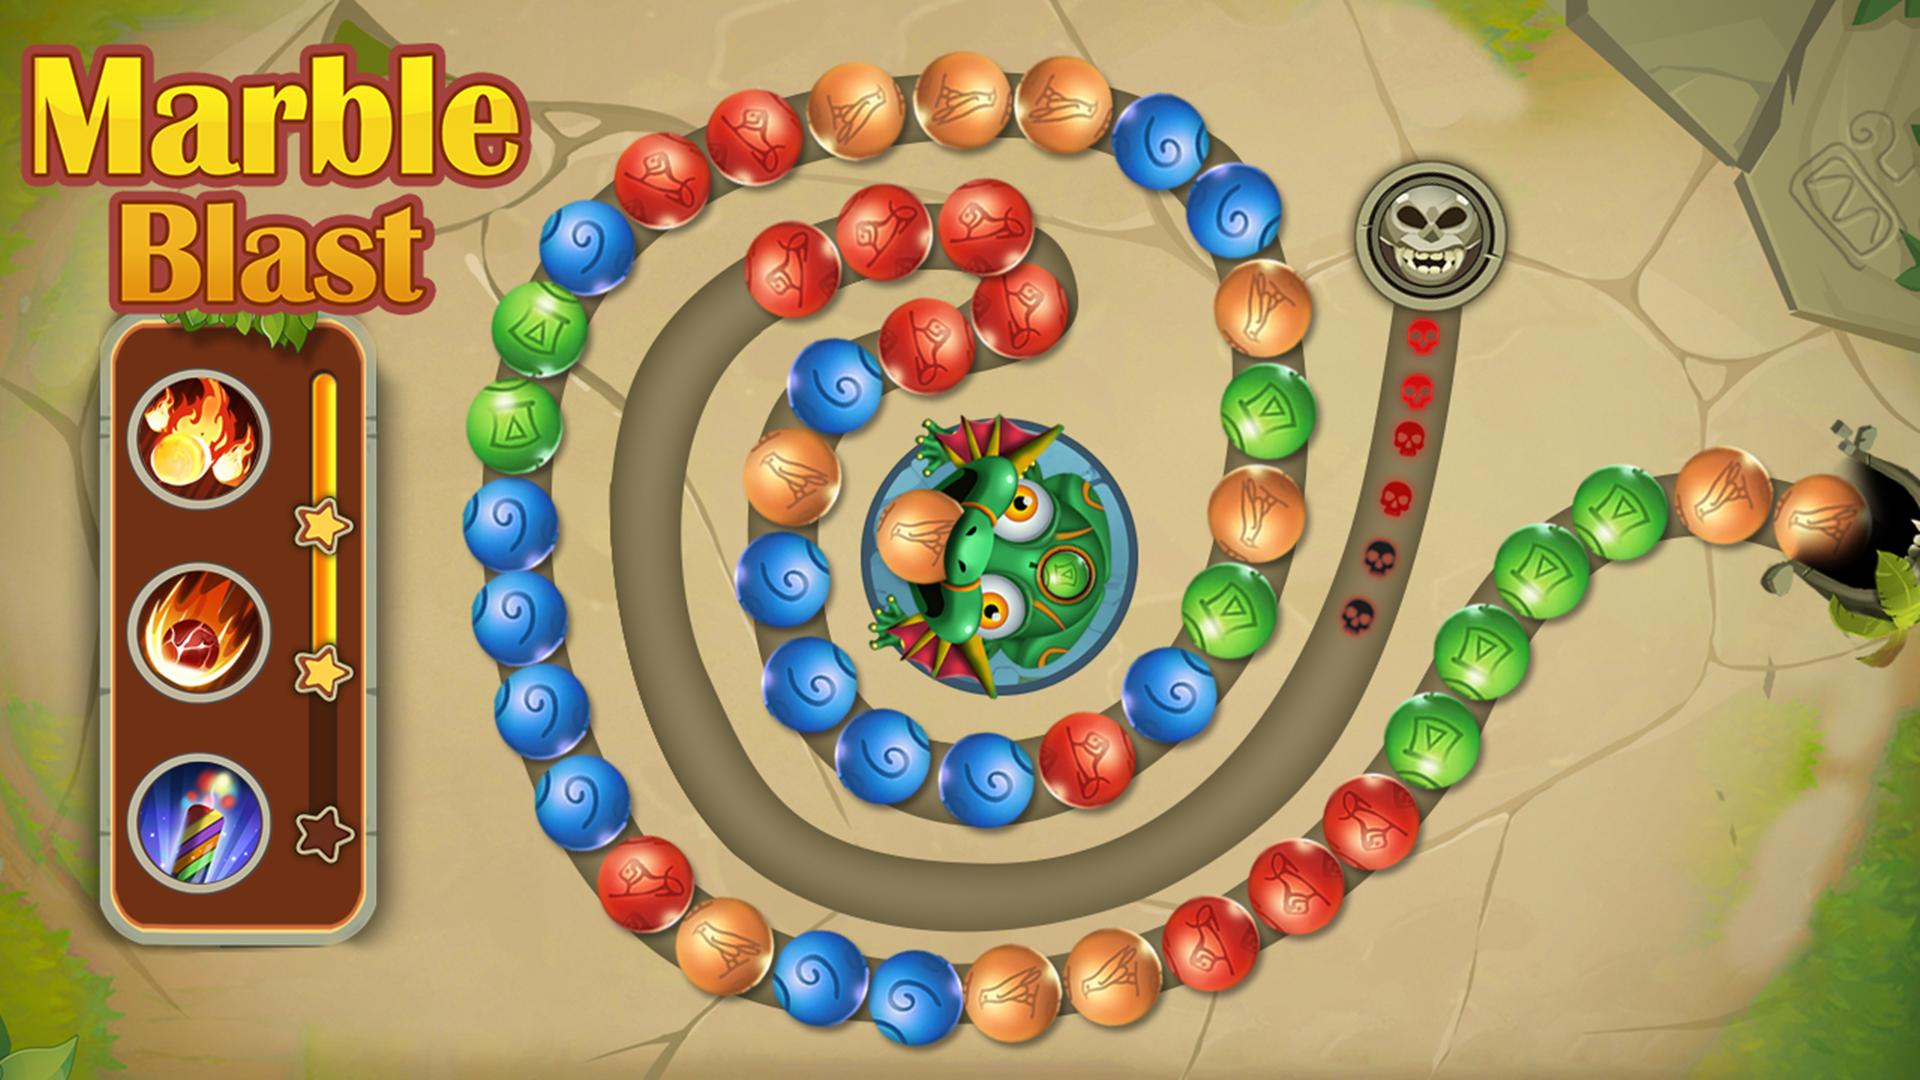 Marble game. Marbles игра. Marble Blast. Мраморы игра. Bron's Quest [Marble Syrup].